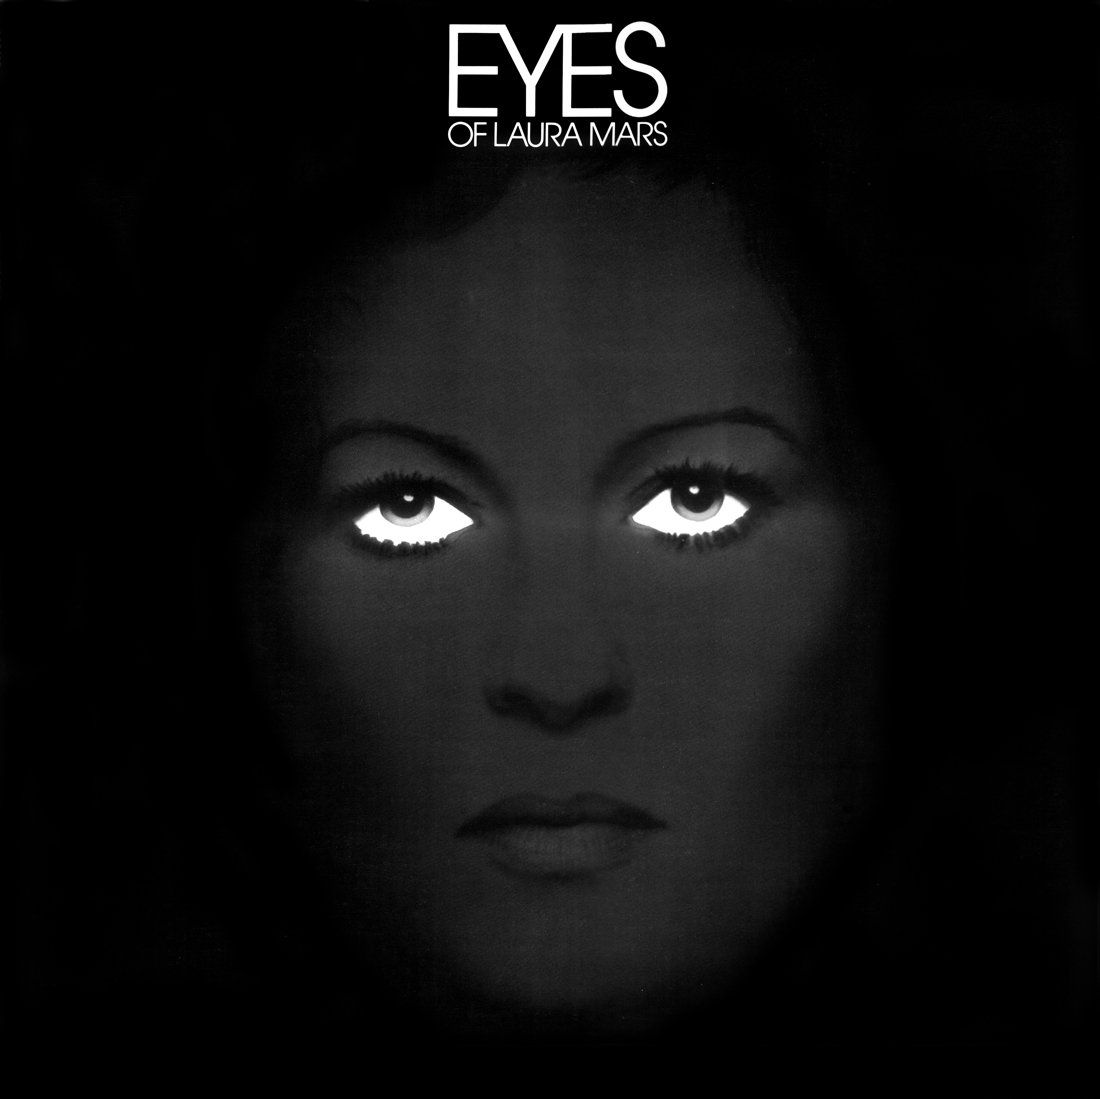 Front cover of Eyes of Laura Mars soundtrack album.